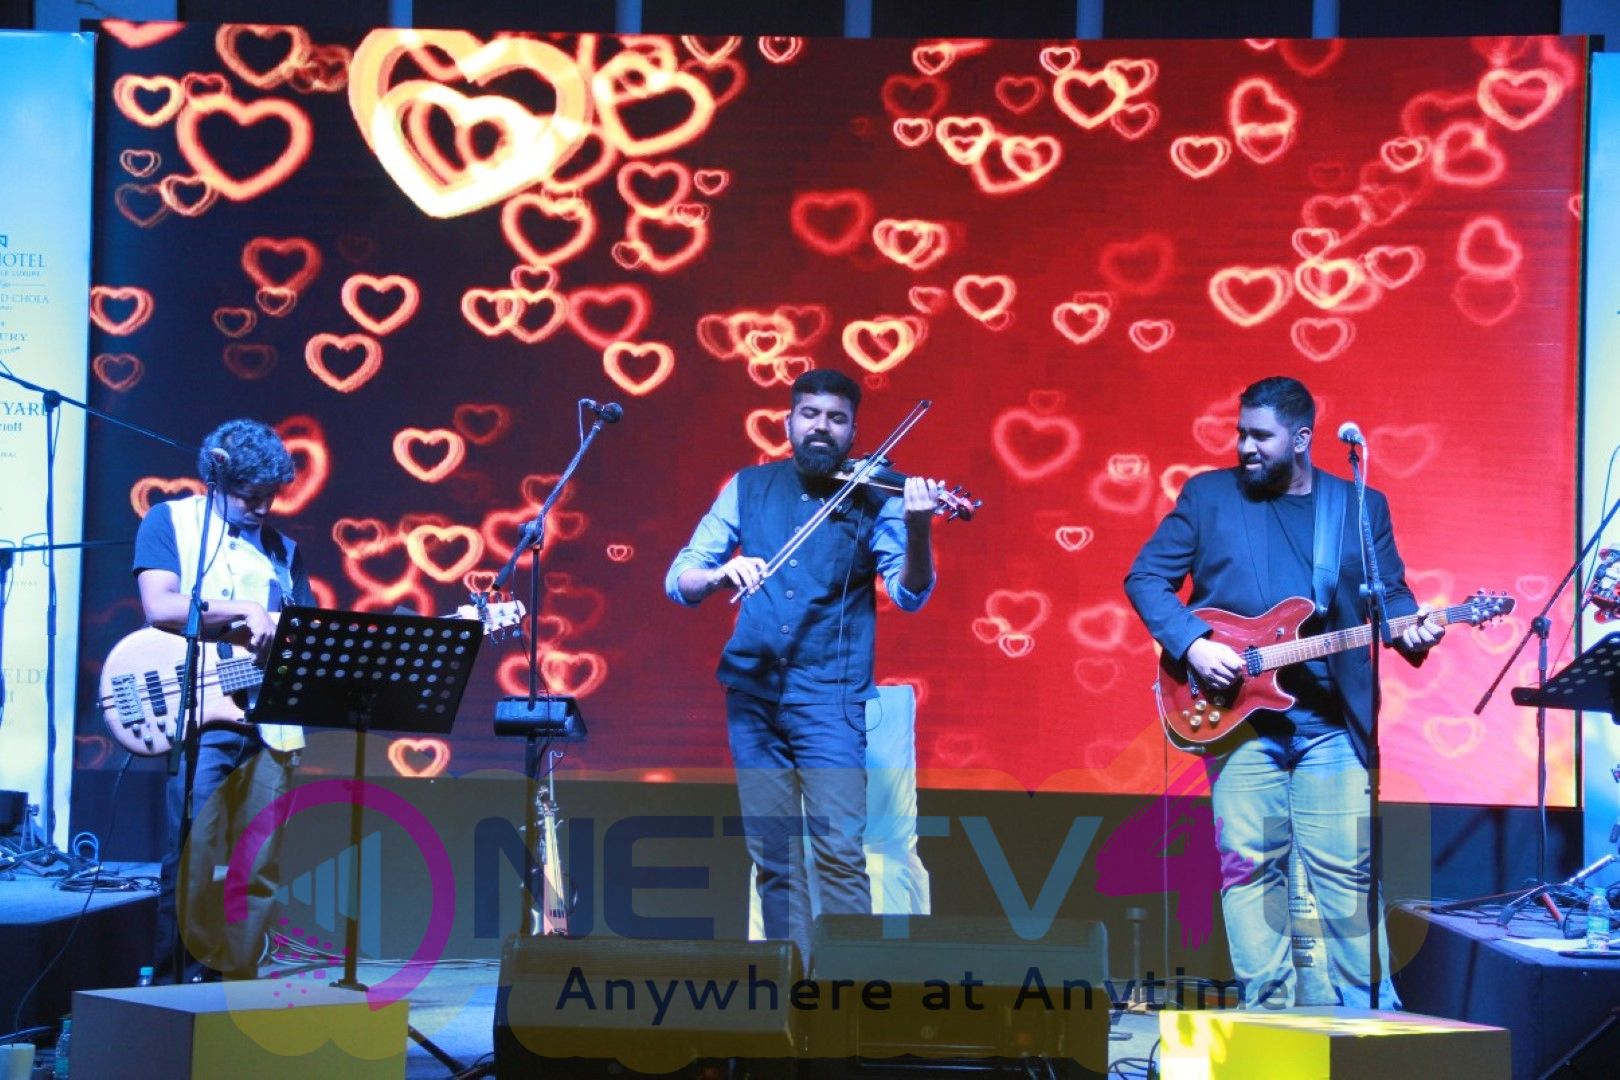 Marriot International Conducted An Opportunistic Meet At  Westin Hotel Velachery Along With A Soulful Music By Karthick Iyers  I